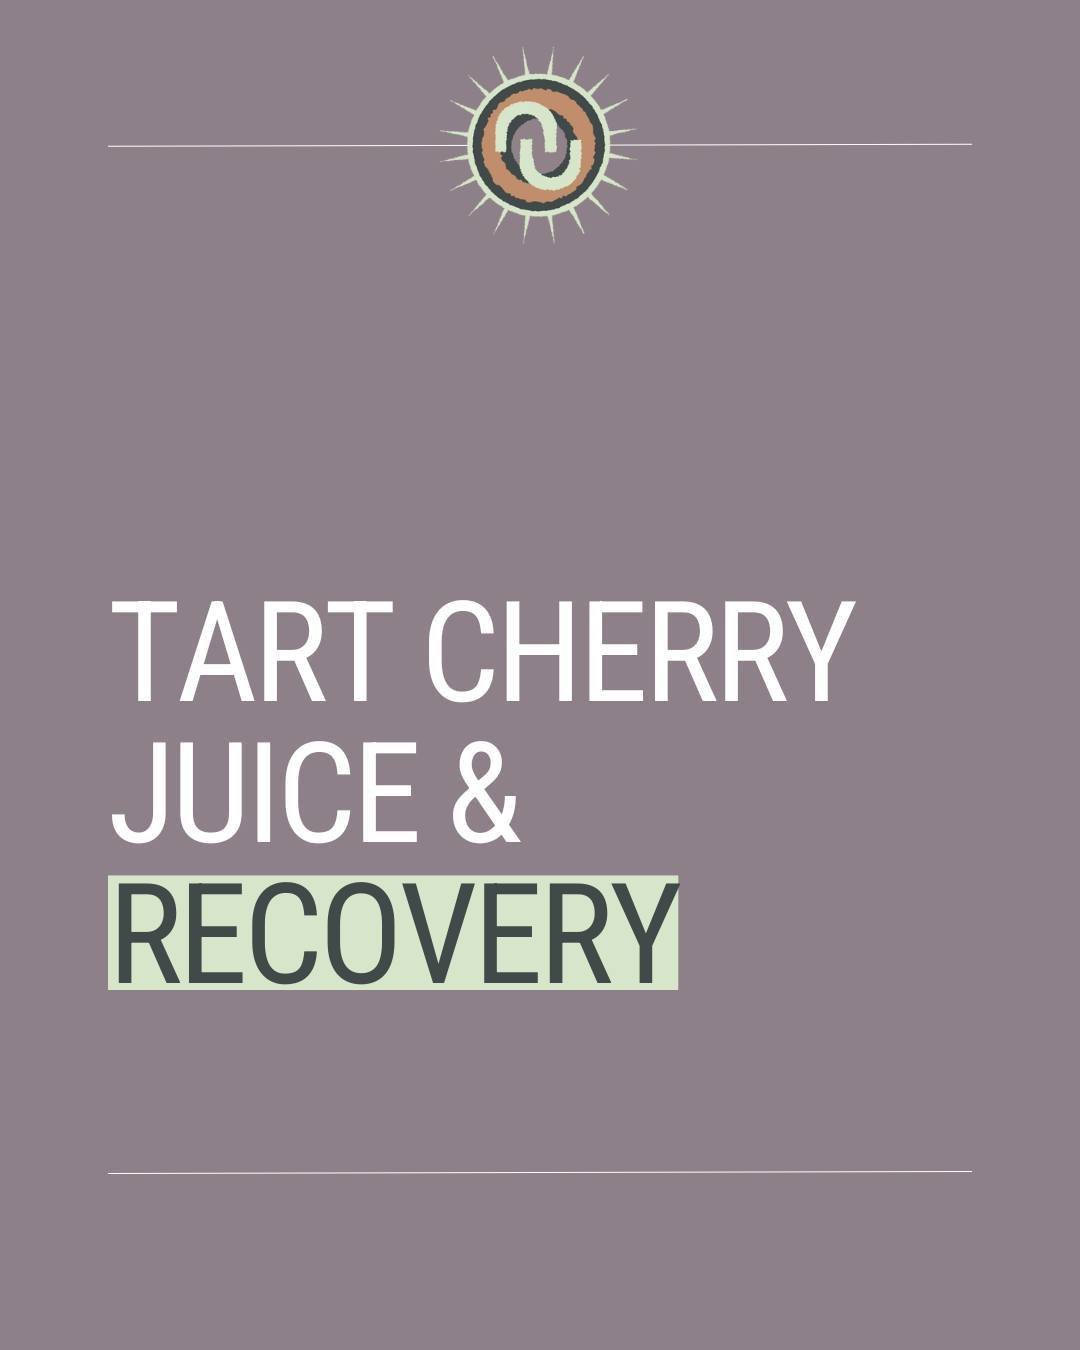 What's the deal with tart cherry juice? ⁠
⁠
I'm so glad that you asked because...⁠
⁠
Research has shown that the anthocyanins in tart cherry juice ⁠
➖aid muscle recovery⁠
➖minimize damage⁠
➖reduce inflammation. ⁠
⁠
Bonus: Its melatonin content can al